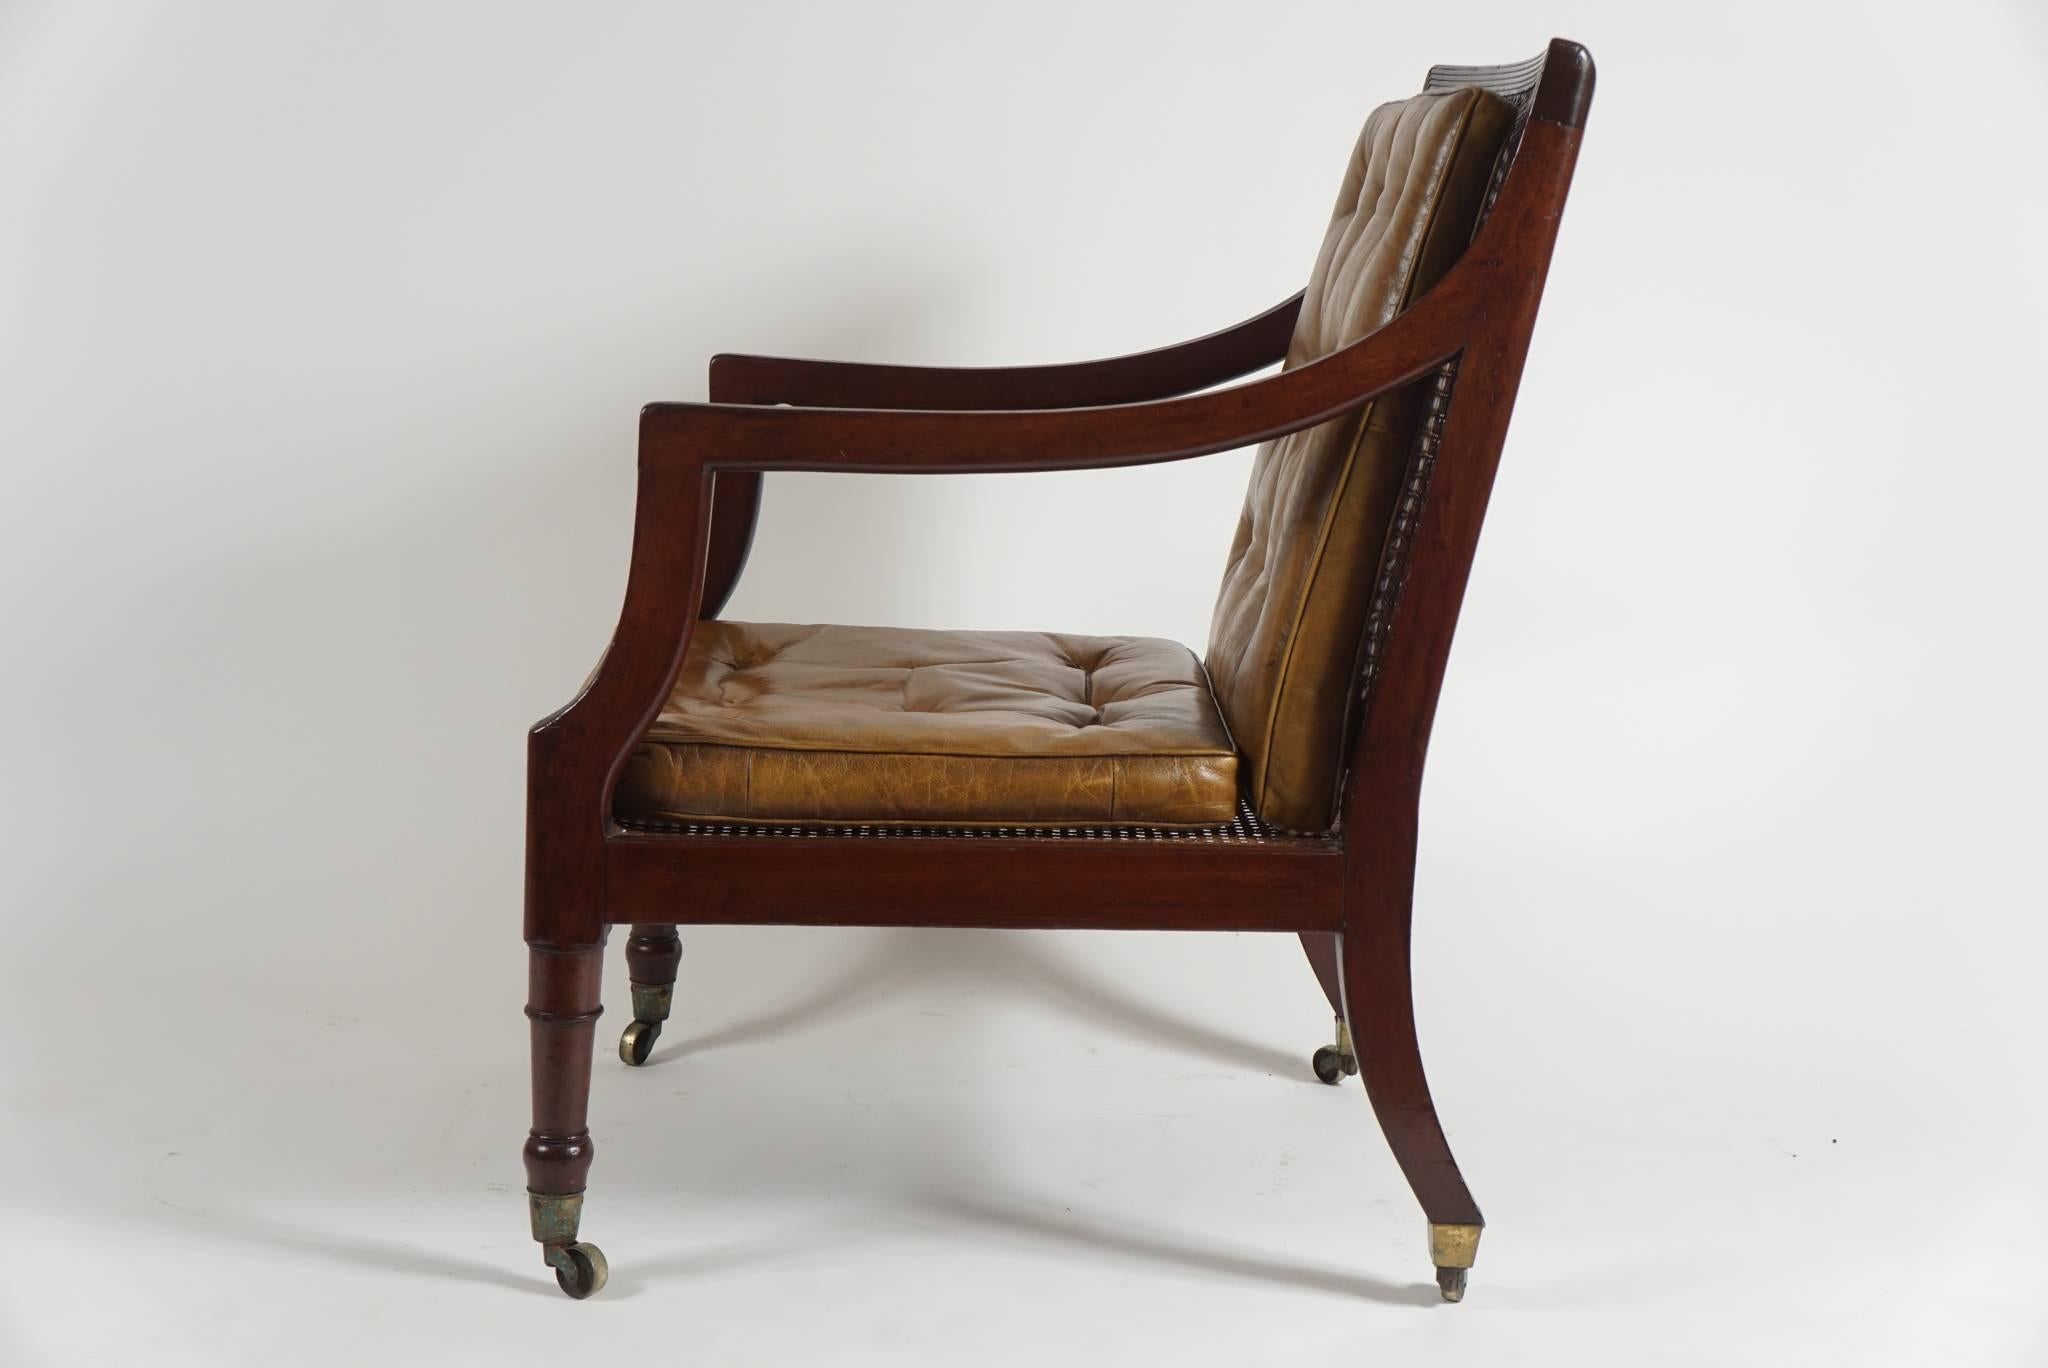 18th Century George III Mahogany & Cane Arm or Library Chair, England, c. 1800